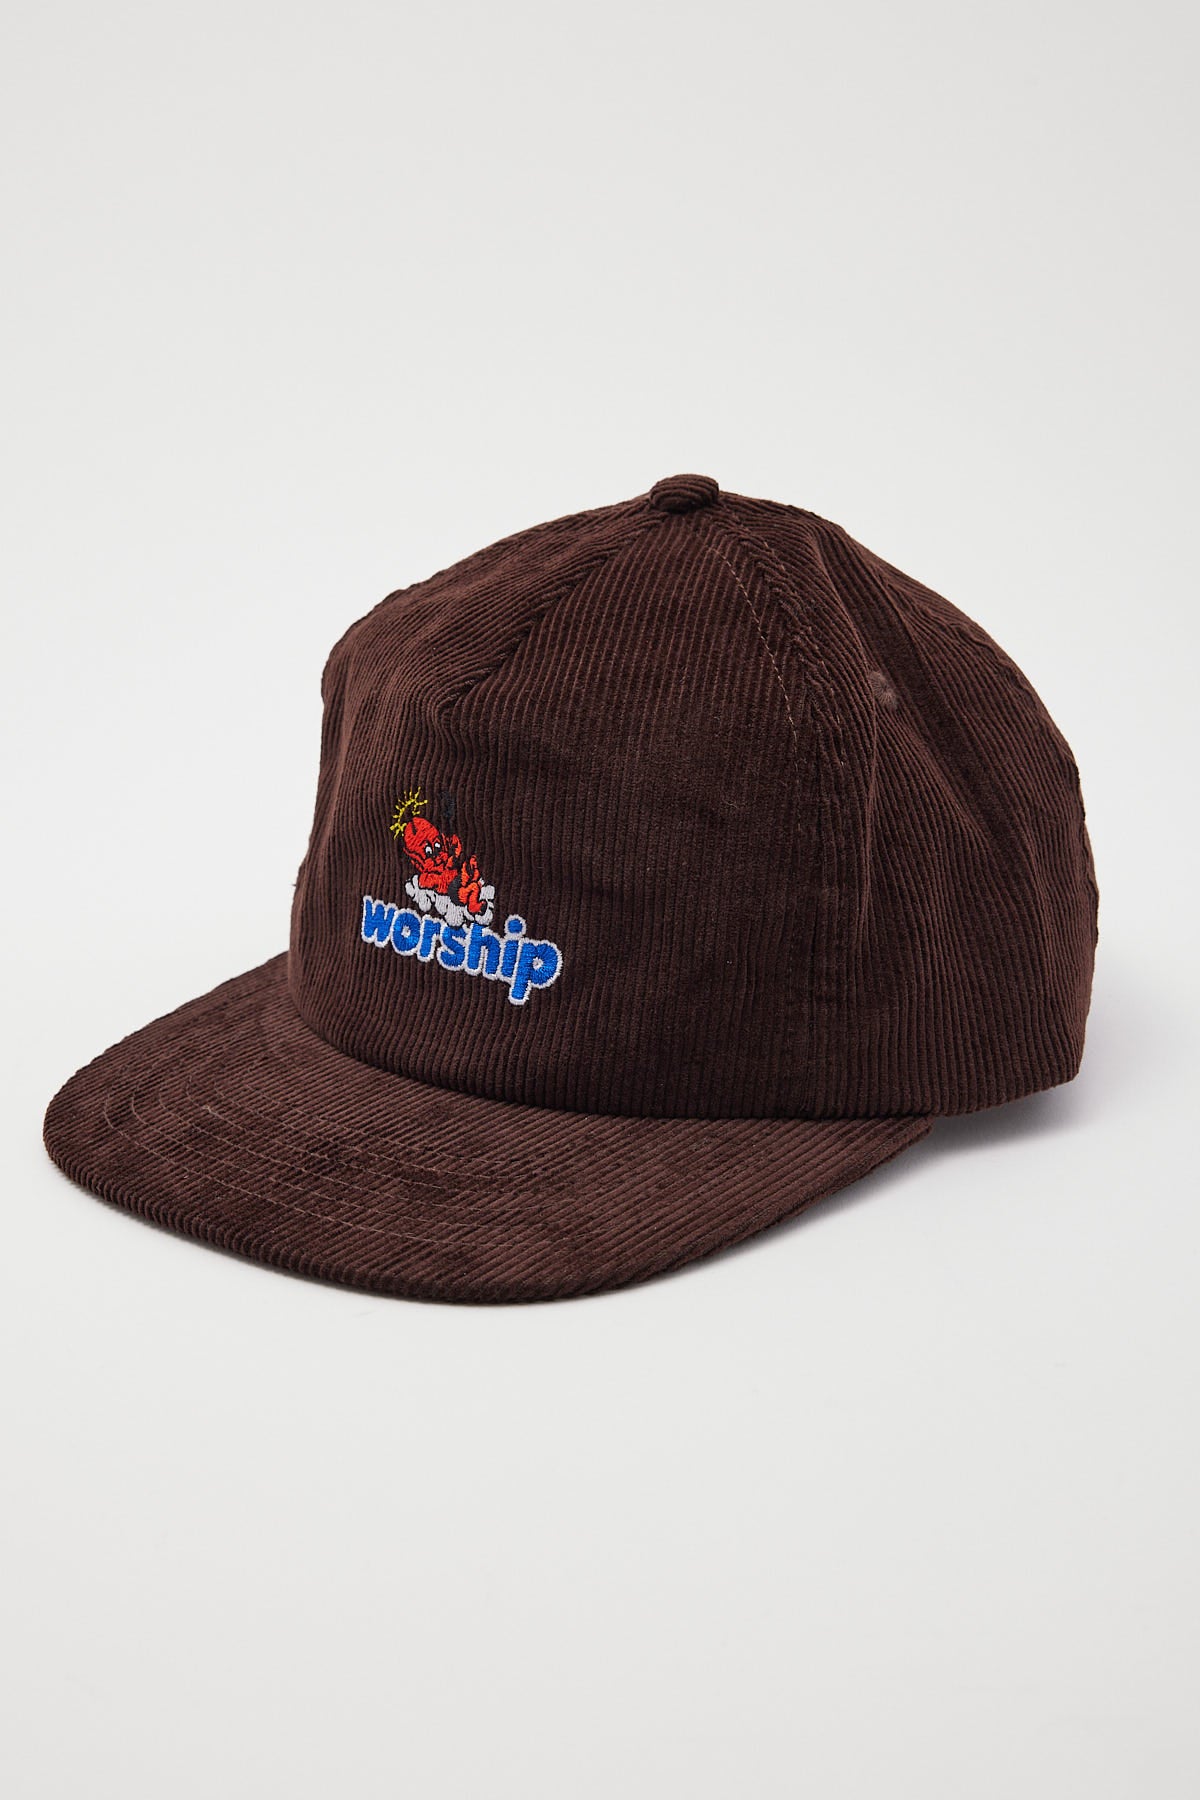 Worship Above The Clouds Hat Fudge